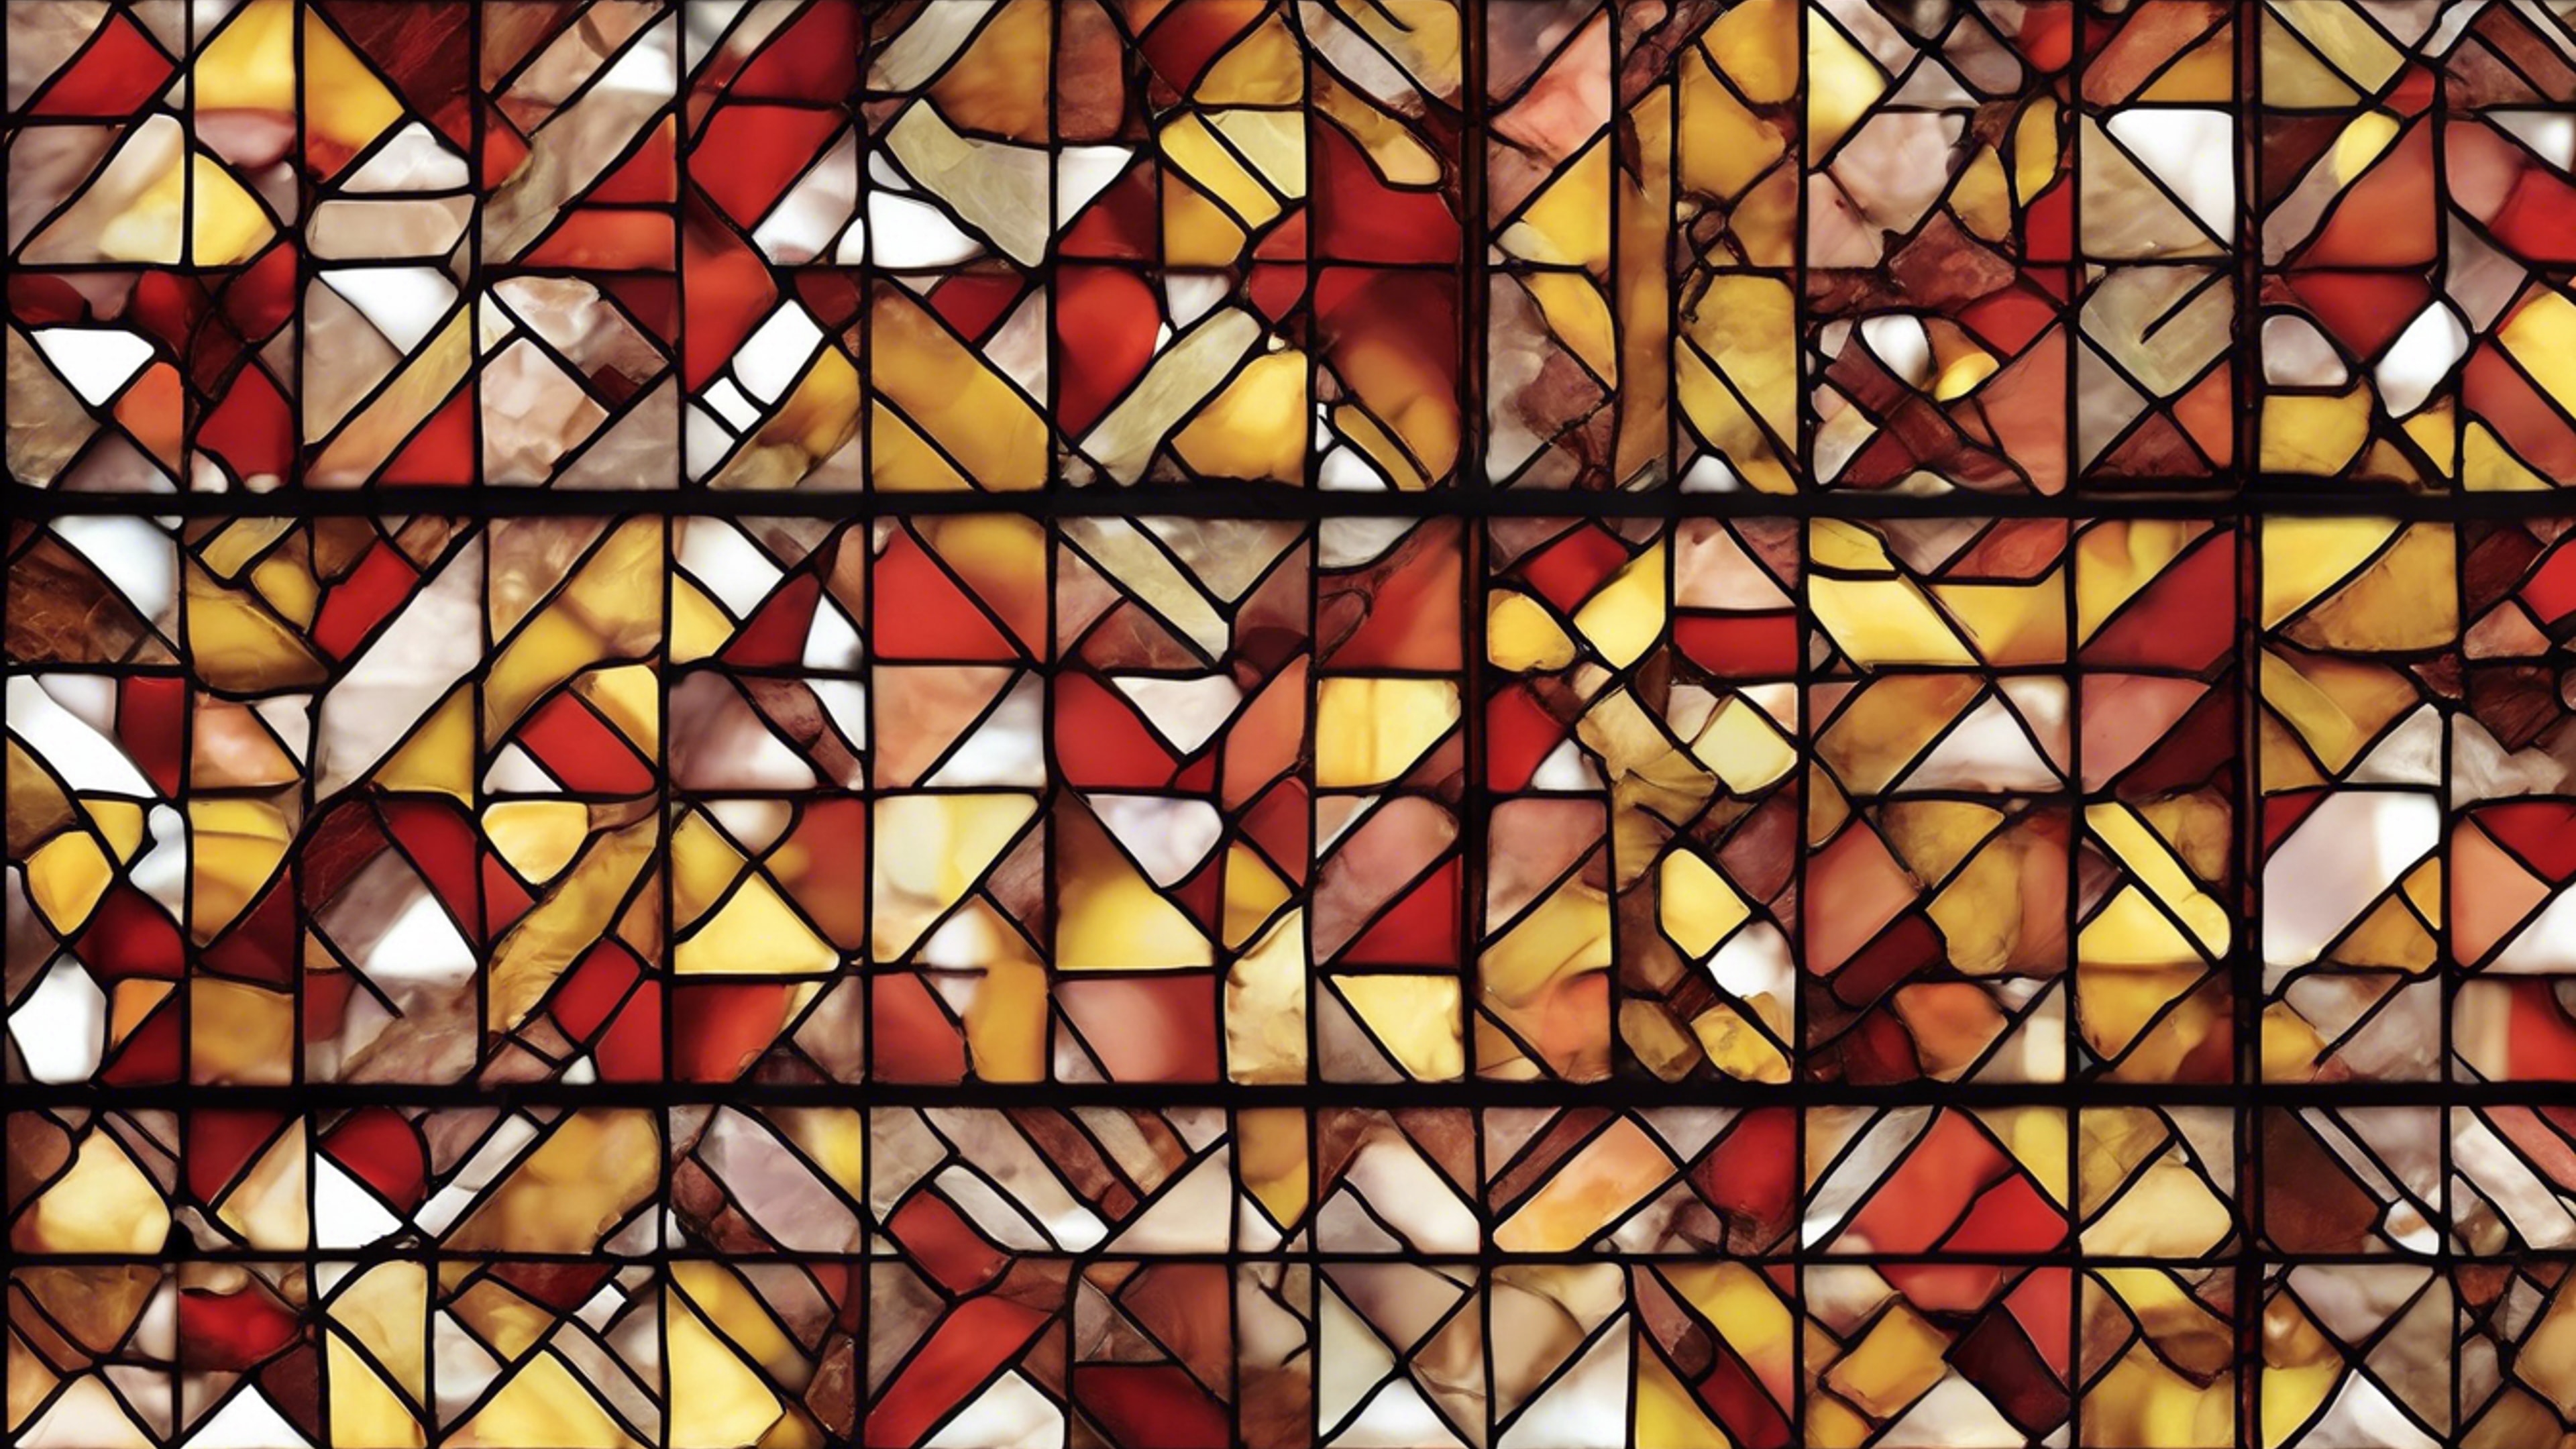 A stained glass design using a repeating motif of red and yellow bricks. 牆紙[d98aa8b1ebac46789cc9]